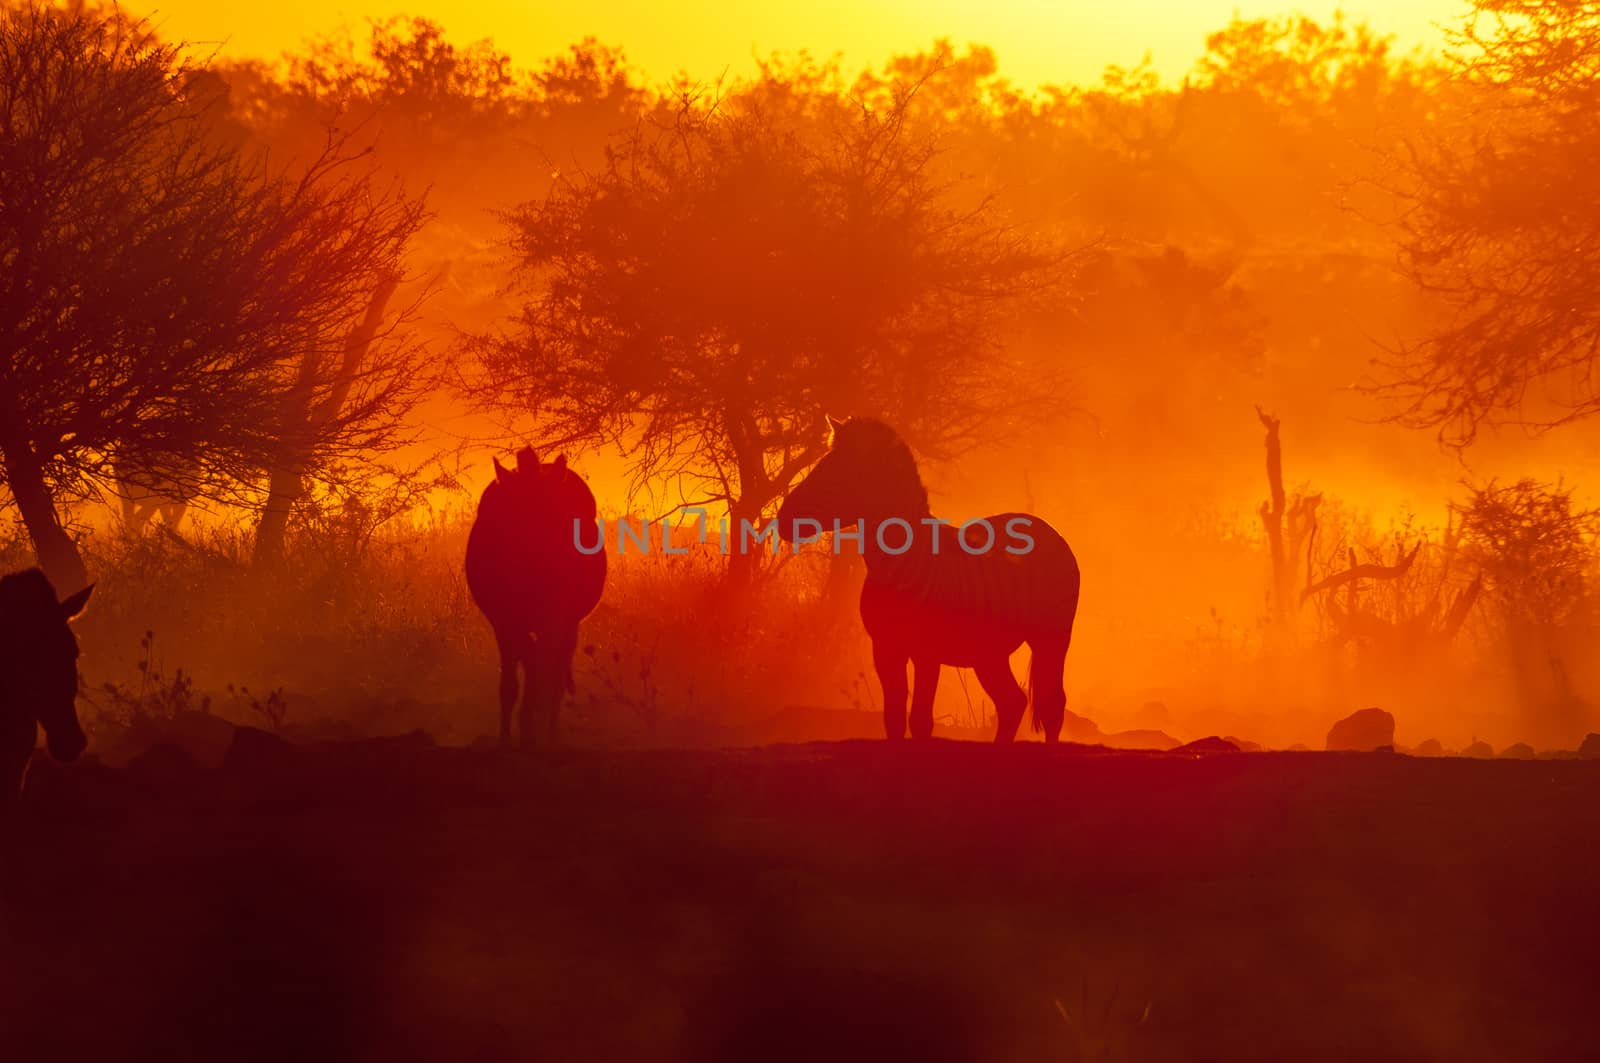 Silhouettes of Burchells zebras at sunset by dpreezg